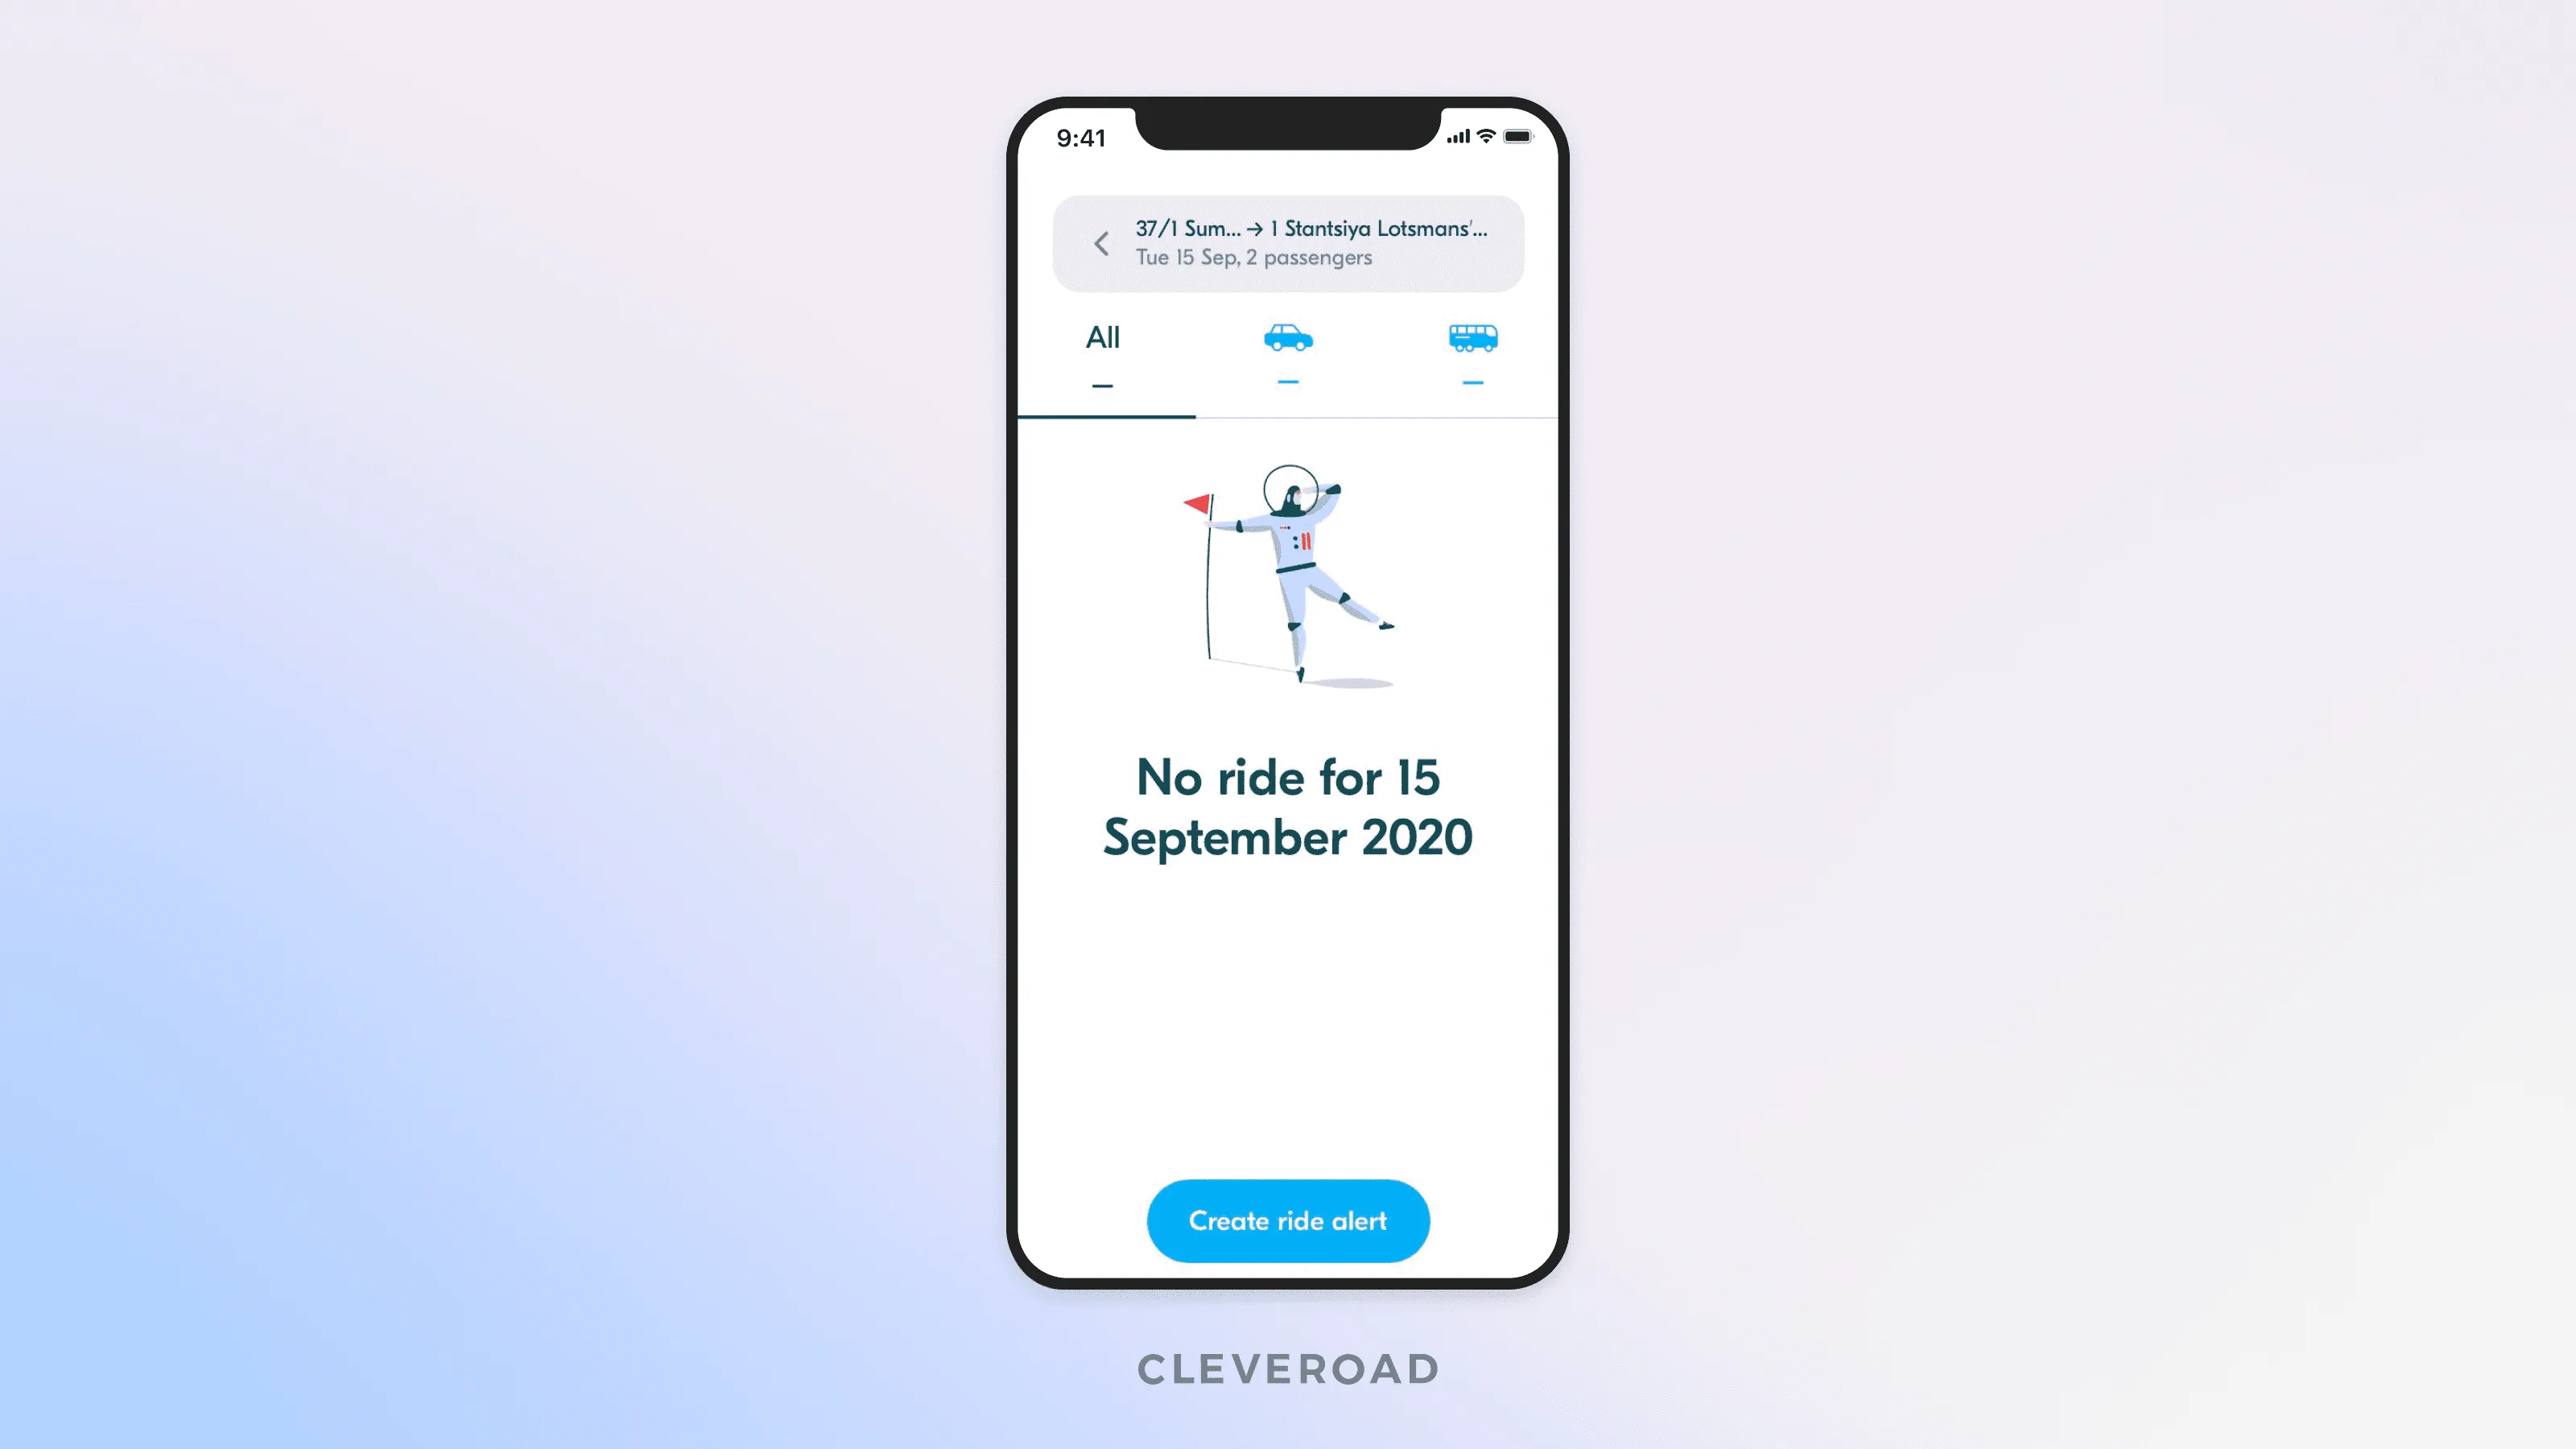 How ride alerts look in a ridesharing app